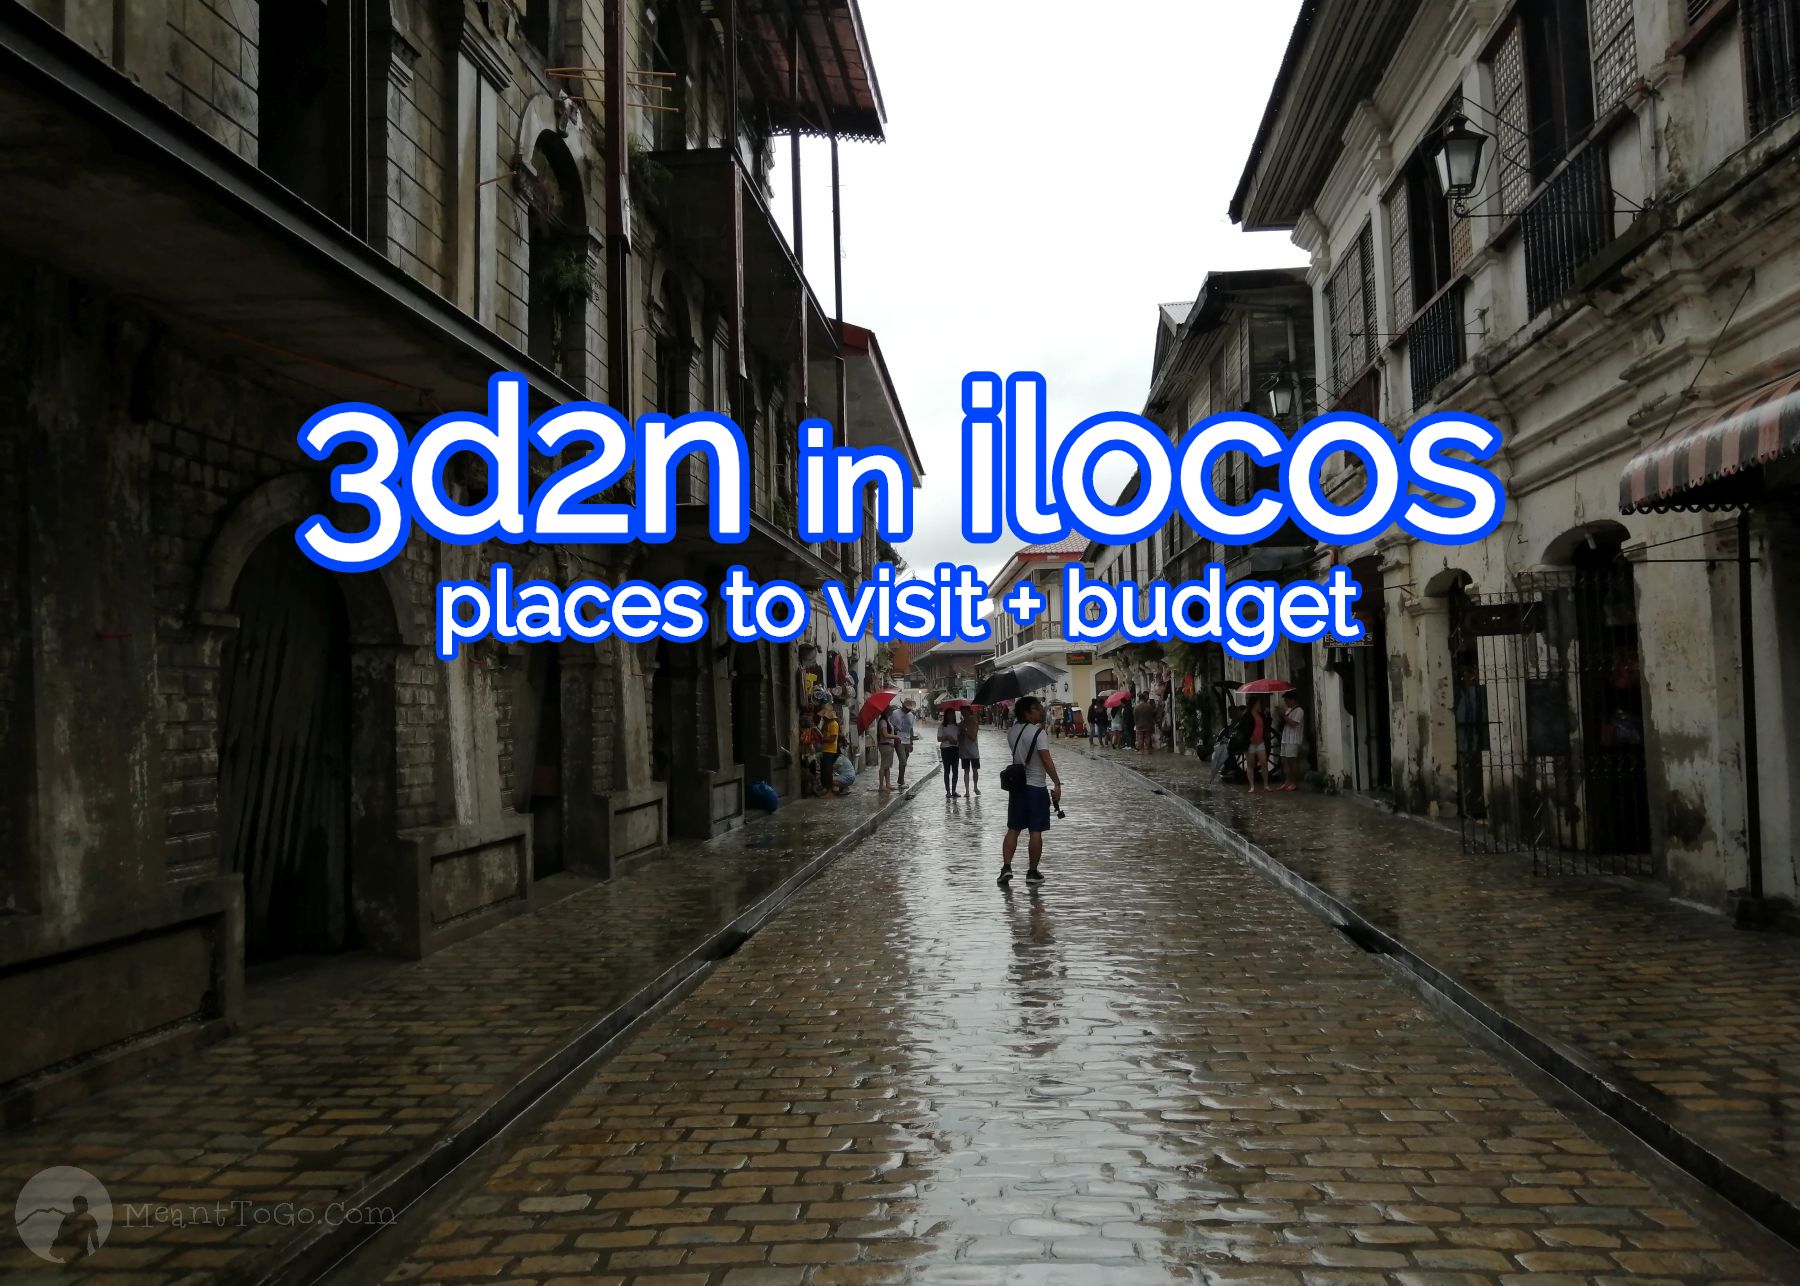 ilocos travel guide - places to visit and budget